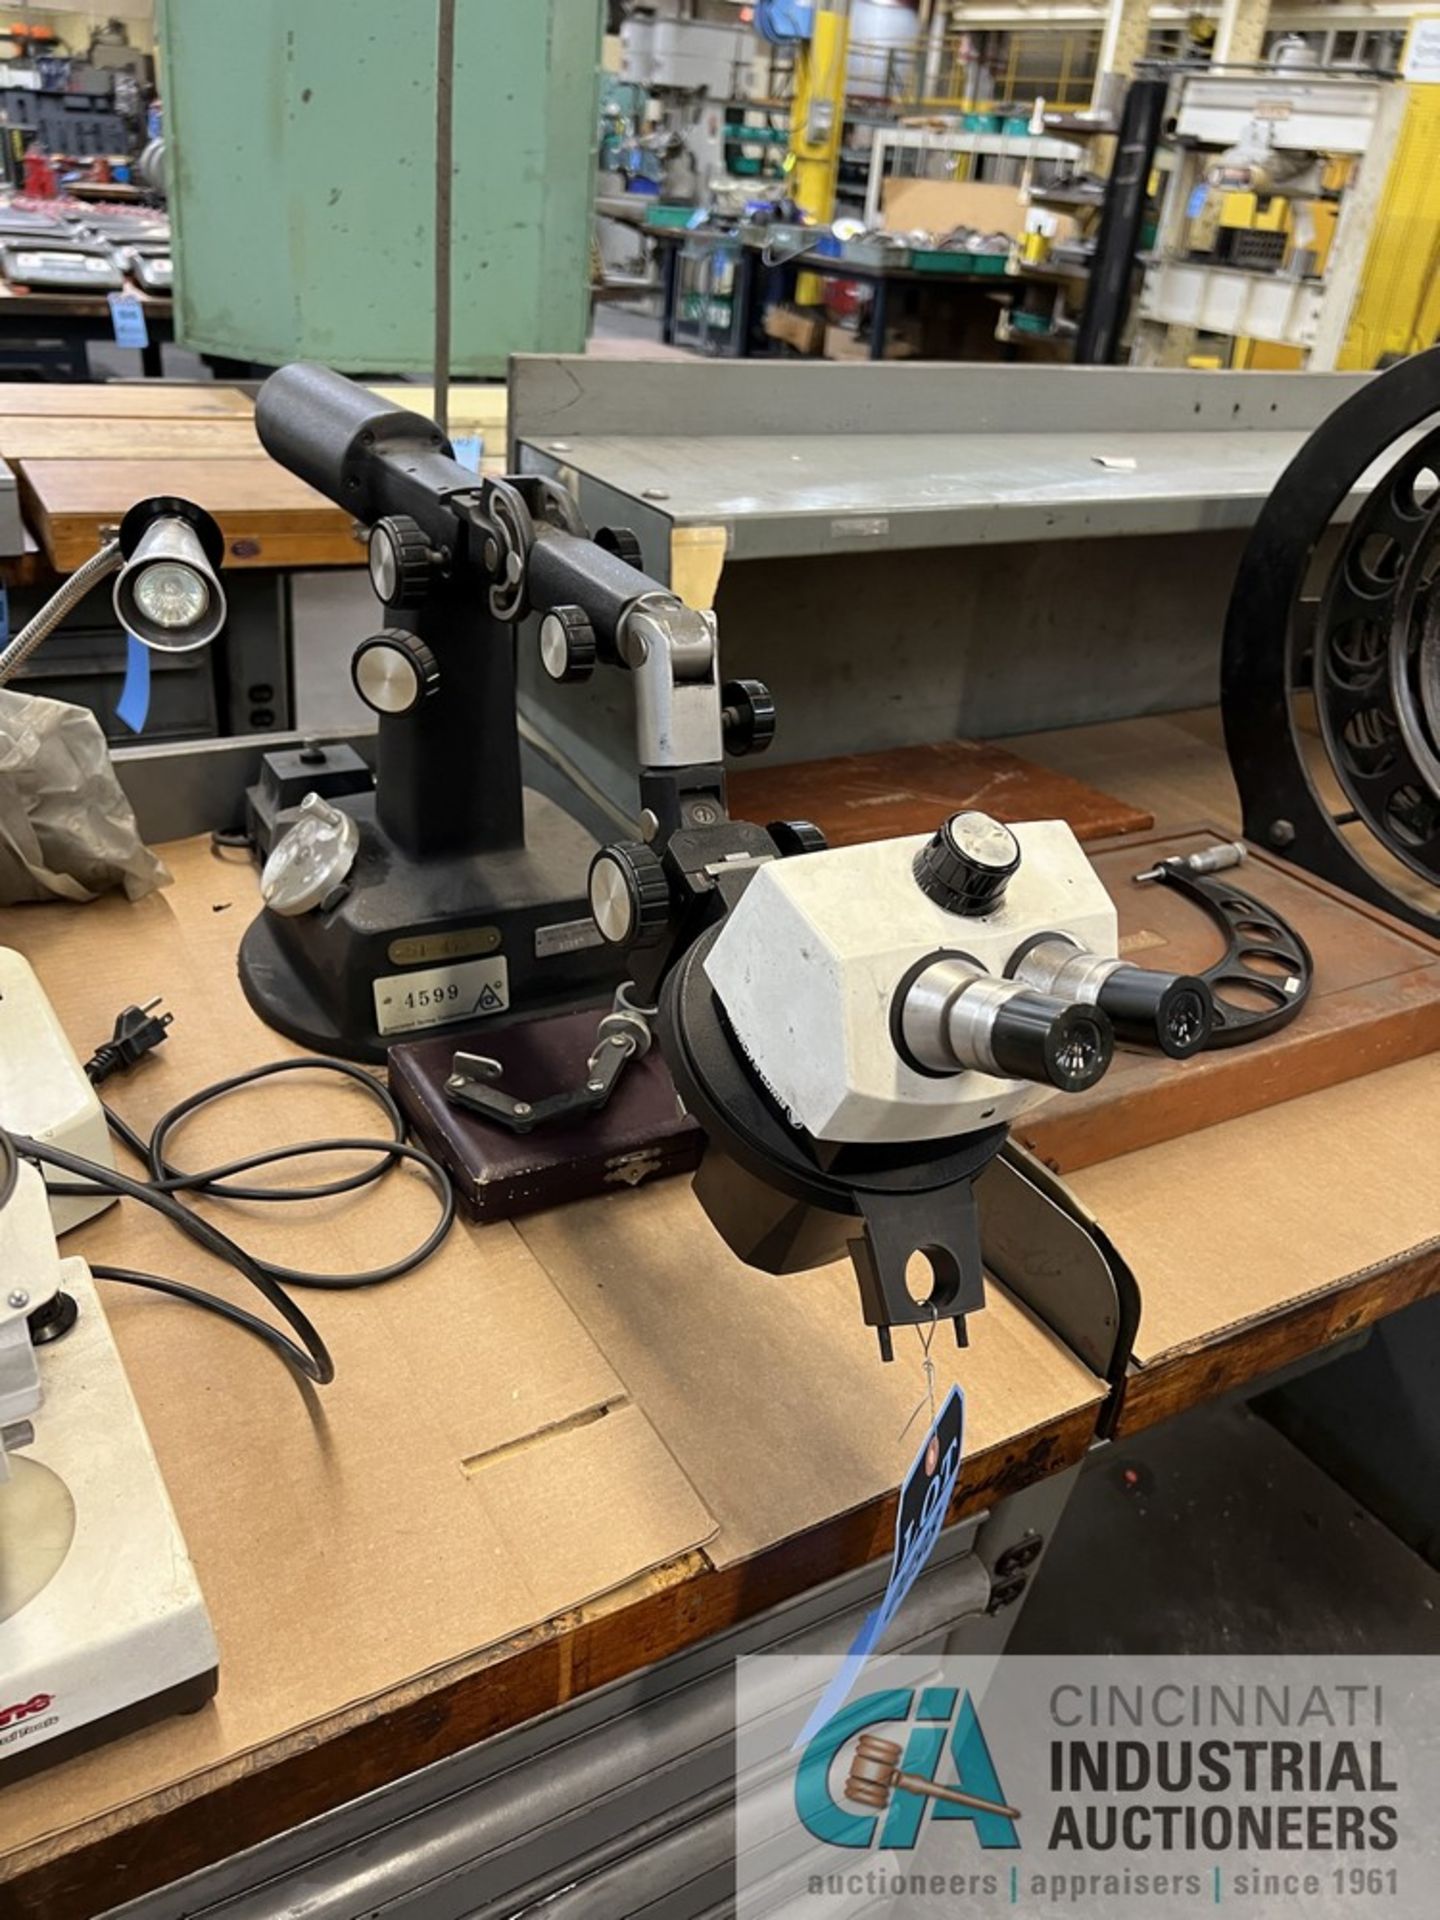 BAUSCH & LOMB STEREOZOOM 7 MICROSCOPE WITH COUNTERWEIGHT STAND